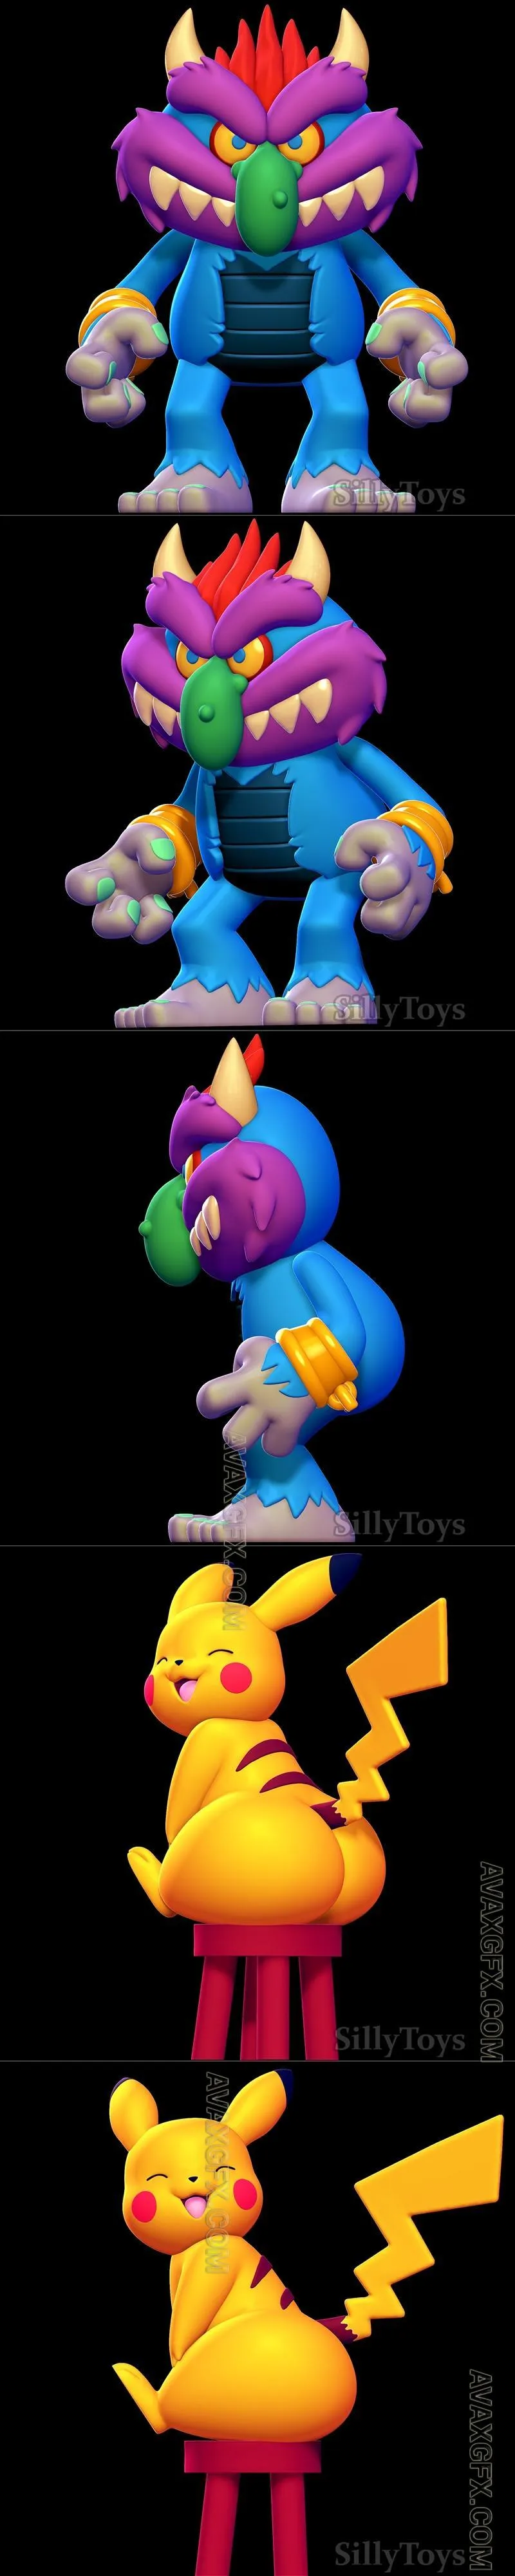 My Pet Monster and Pikachu Sitting on a Stool - STL 3D Model